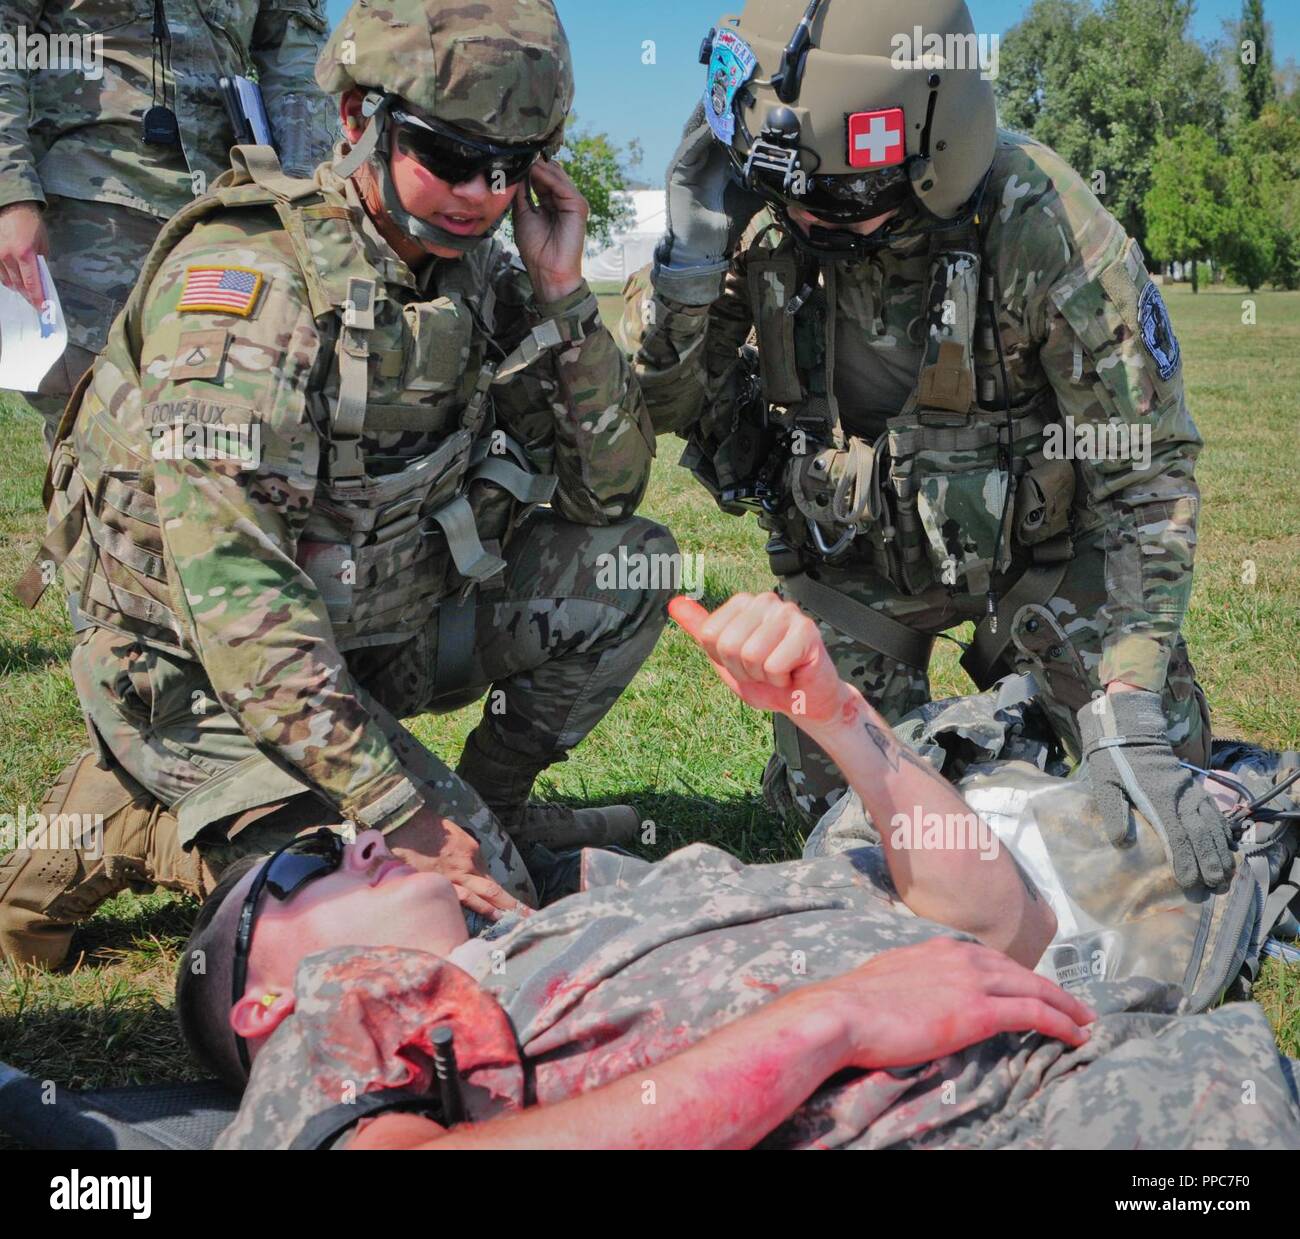 U.S. Army Pfc. Jasmine Comeaux (left) a combat medic assigned to The Headquarters and Headquarters Company, 2nd Battalion 5th Cavalry Regiment, 1st Armored Brigade Combat Team, 1st Cavalry Division explains the simulated casualties injuries to U.S. U.S. Army Sgt. Grayson Harris (right) the medevac flight medic at Mihail Kogalniceanu Air Base in Romania, August 20, 2018. Soldiers conducted Table VIII Medic Skills Validation, an annual training event required for Soldiers to keep their Military Occupational Specialty qualification as a combat medic. Stock Photo